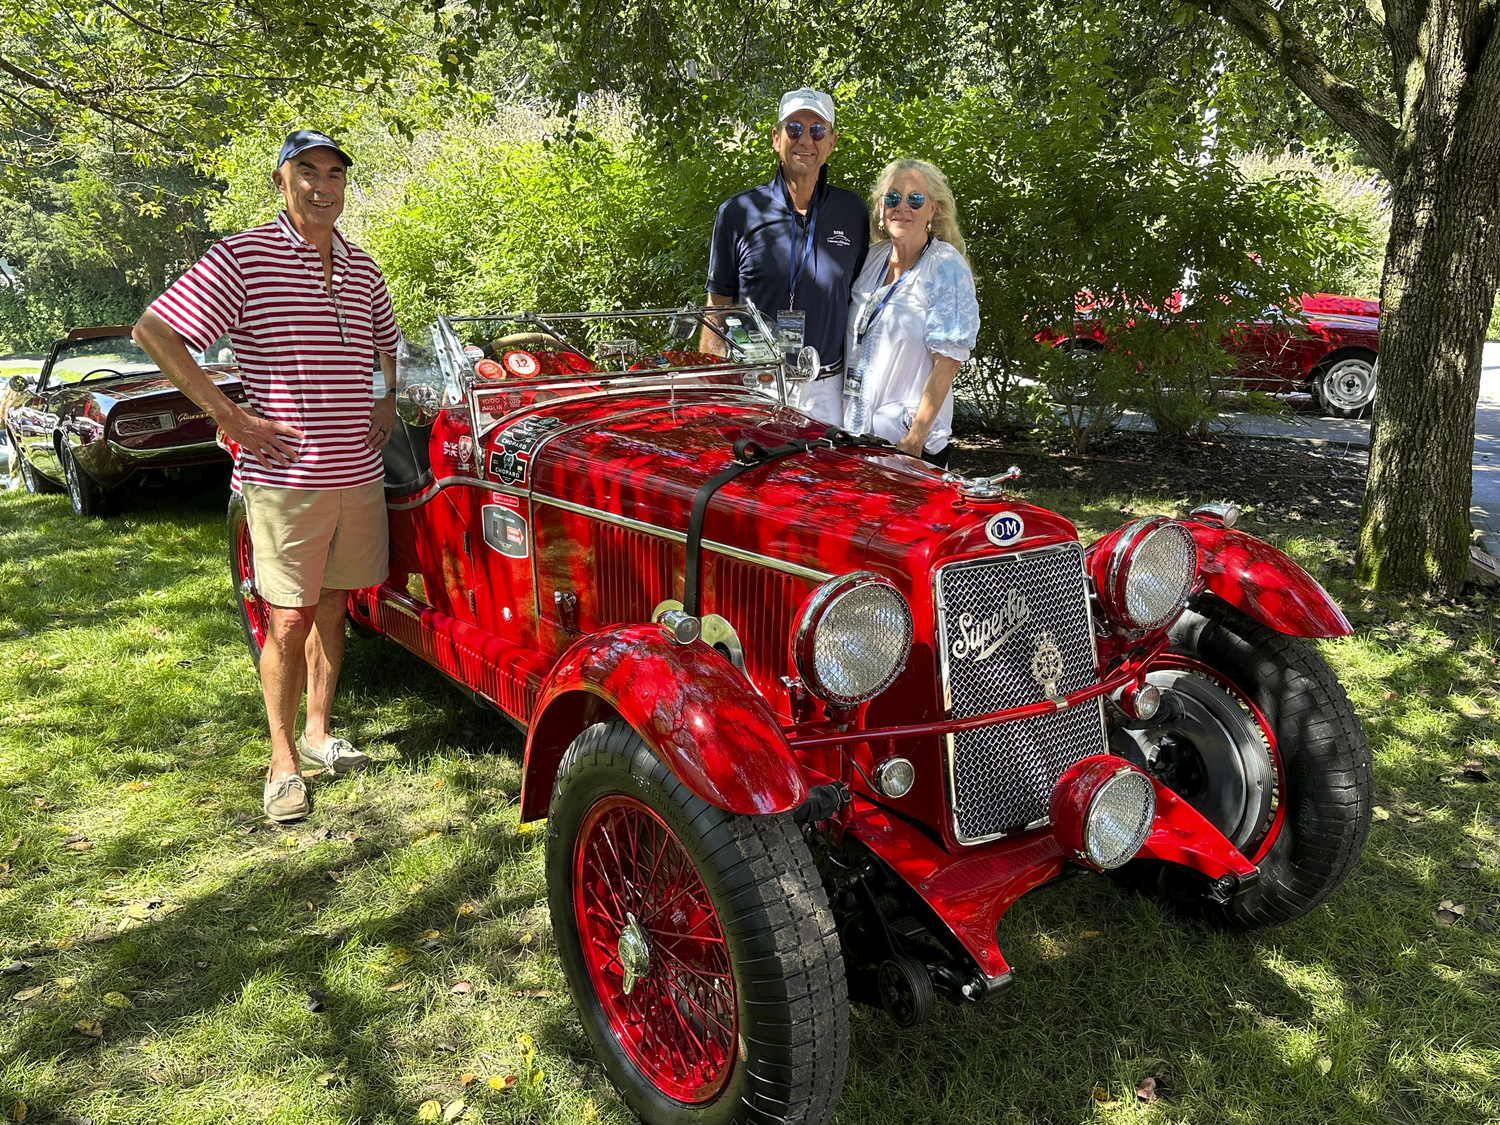 Malcolm Price with Rome and Lisa Arnold at the Concours d'Elegance.   GREGD'ELIA